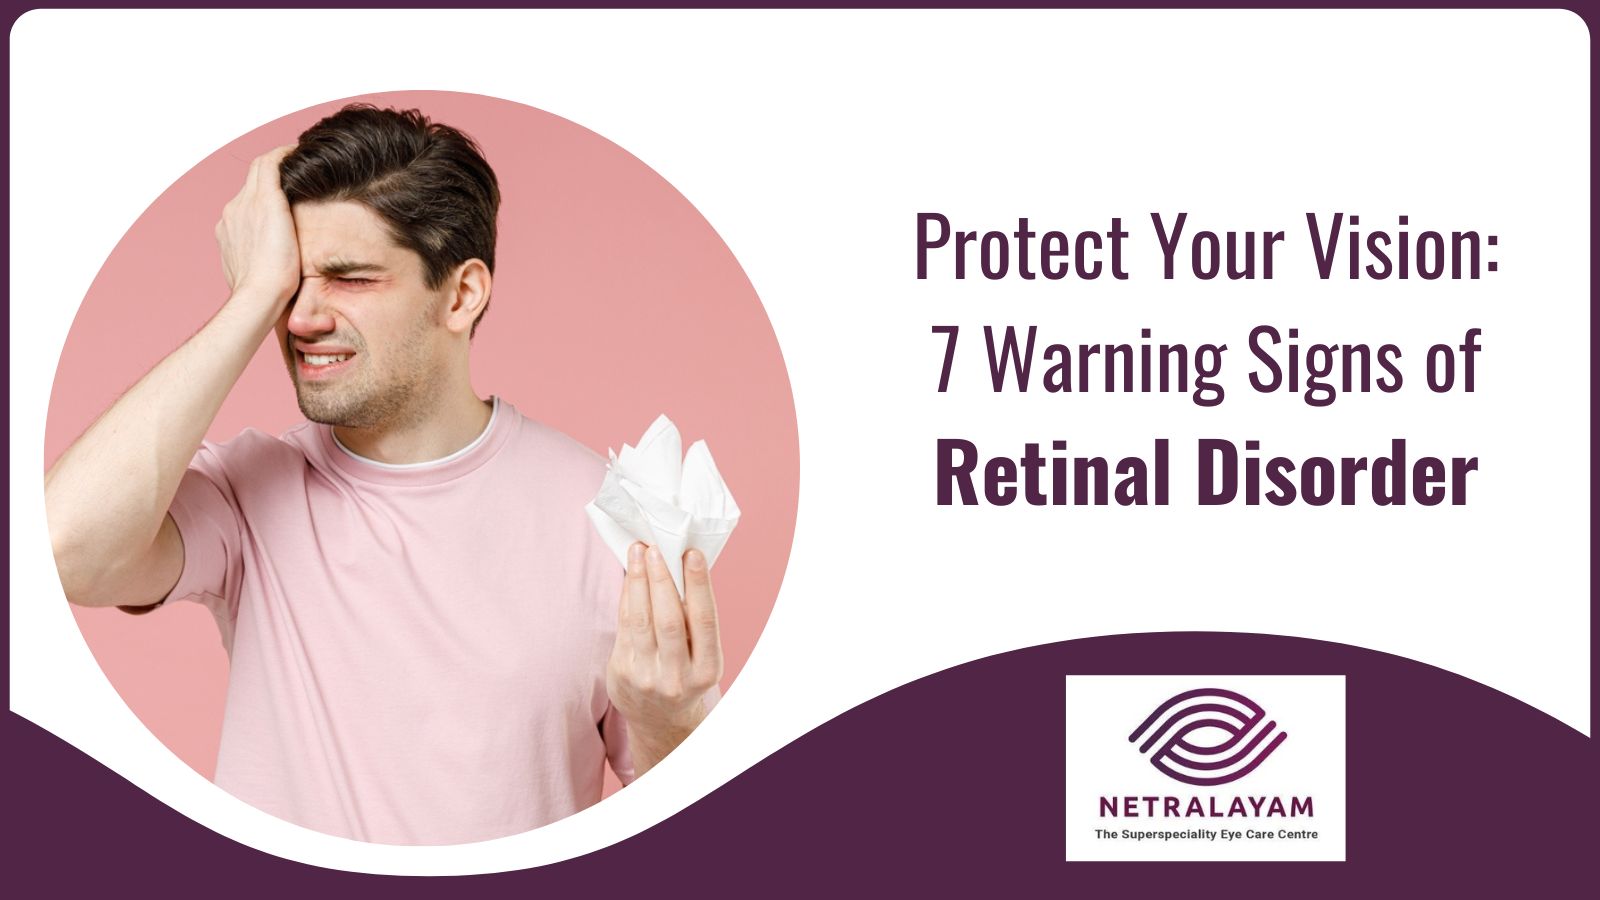 Protect Your Vision: 7 Warning Signs of Retinal Disorder